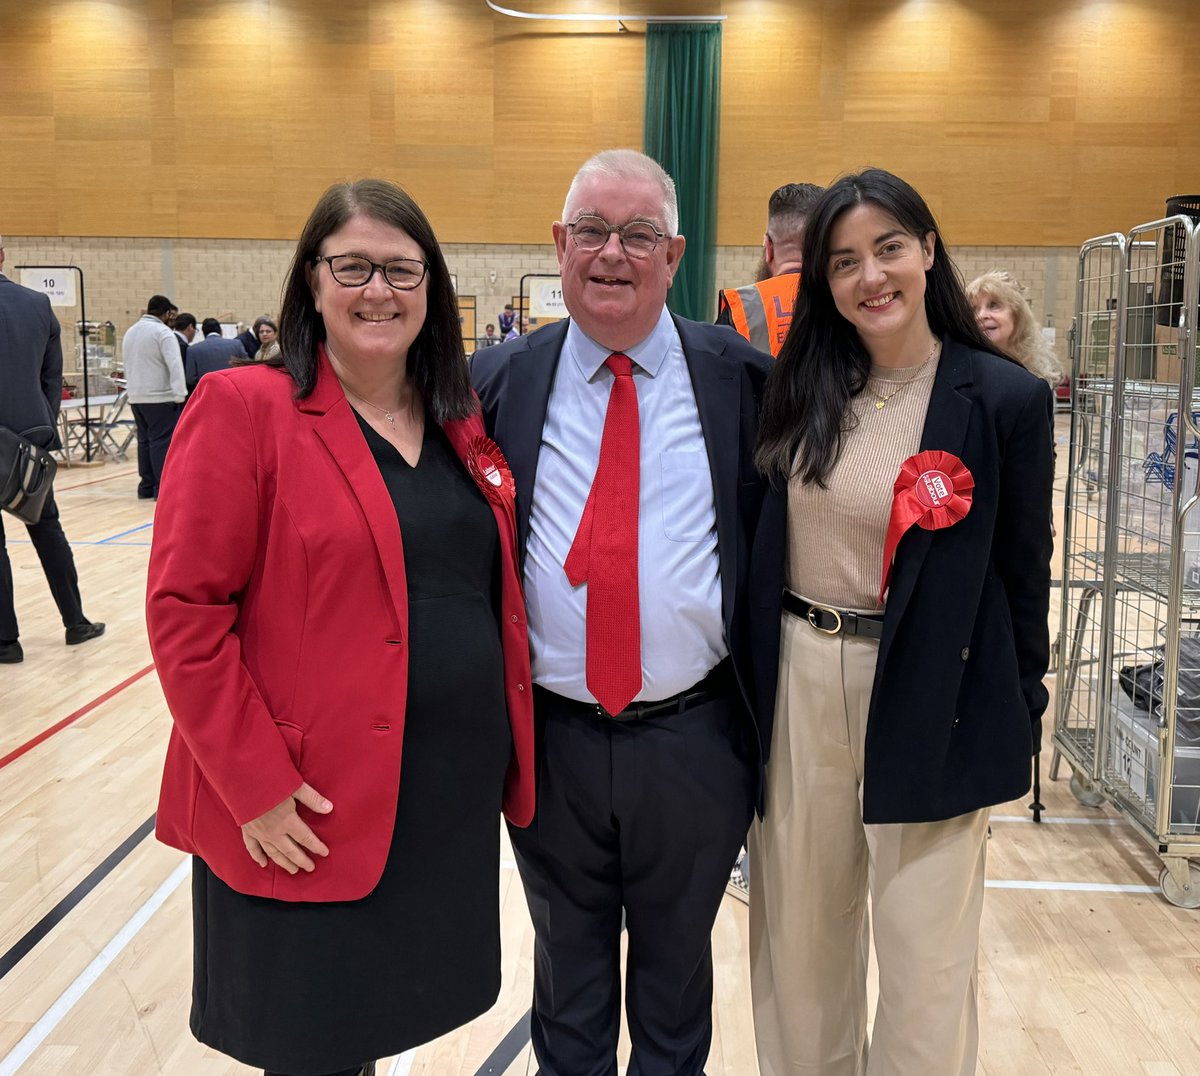 Huge congratulations to Bedfordshire’s new Labour Police and Crime Commissioner-  @JohnTizard! 🌹 #LabourGain